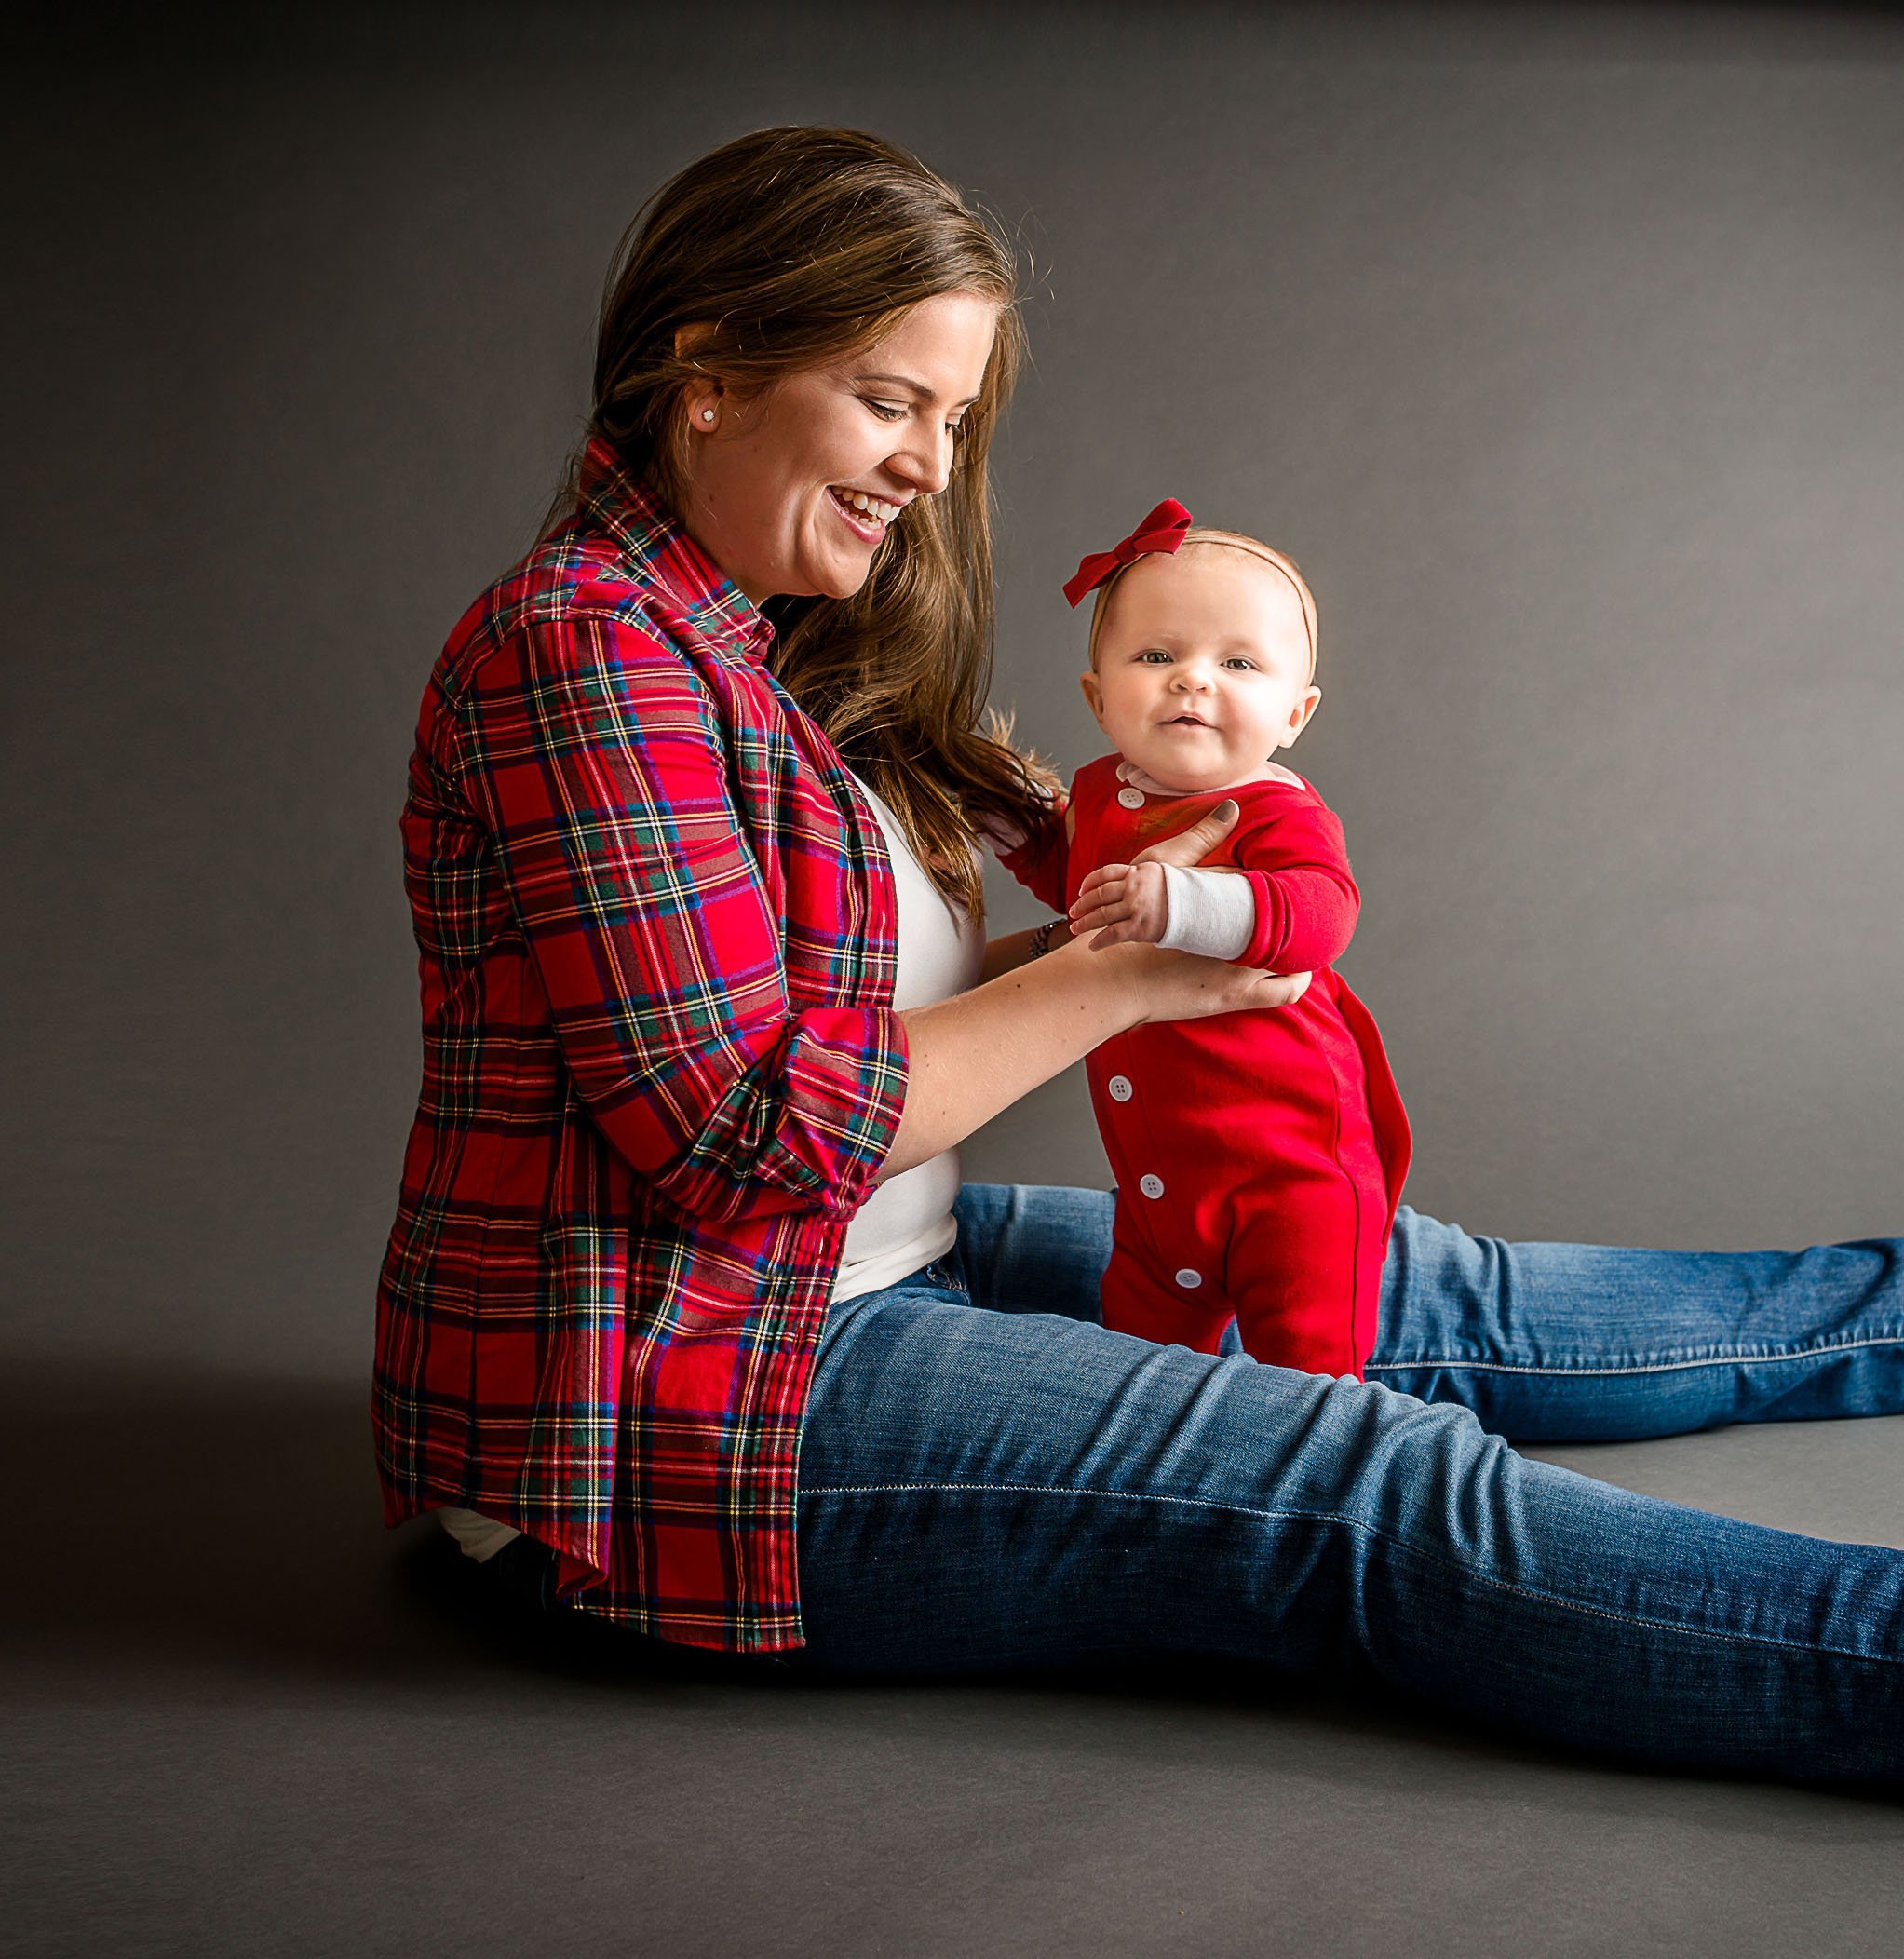 Mom holding 6 mo old baby girl standing up in red pajamas One Big Happy Photo